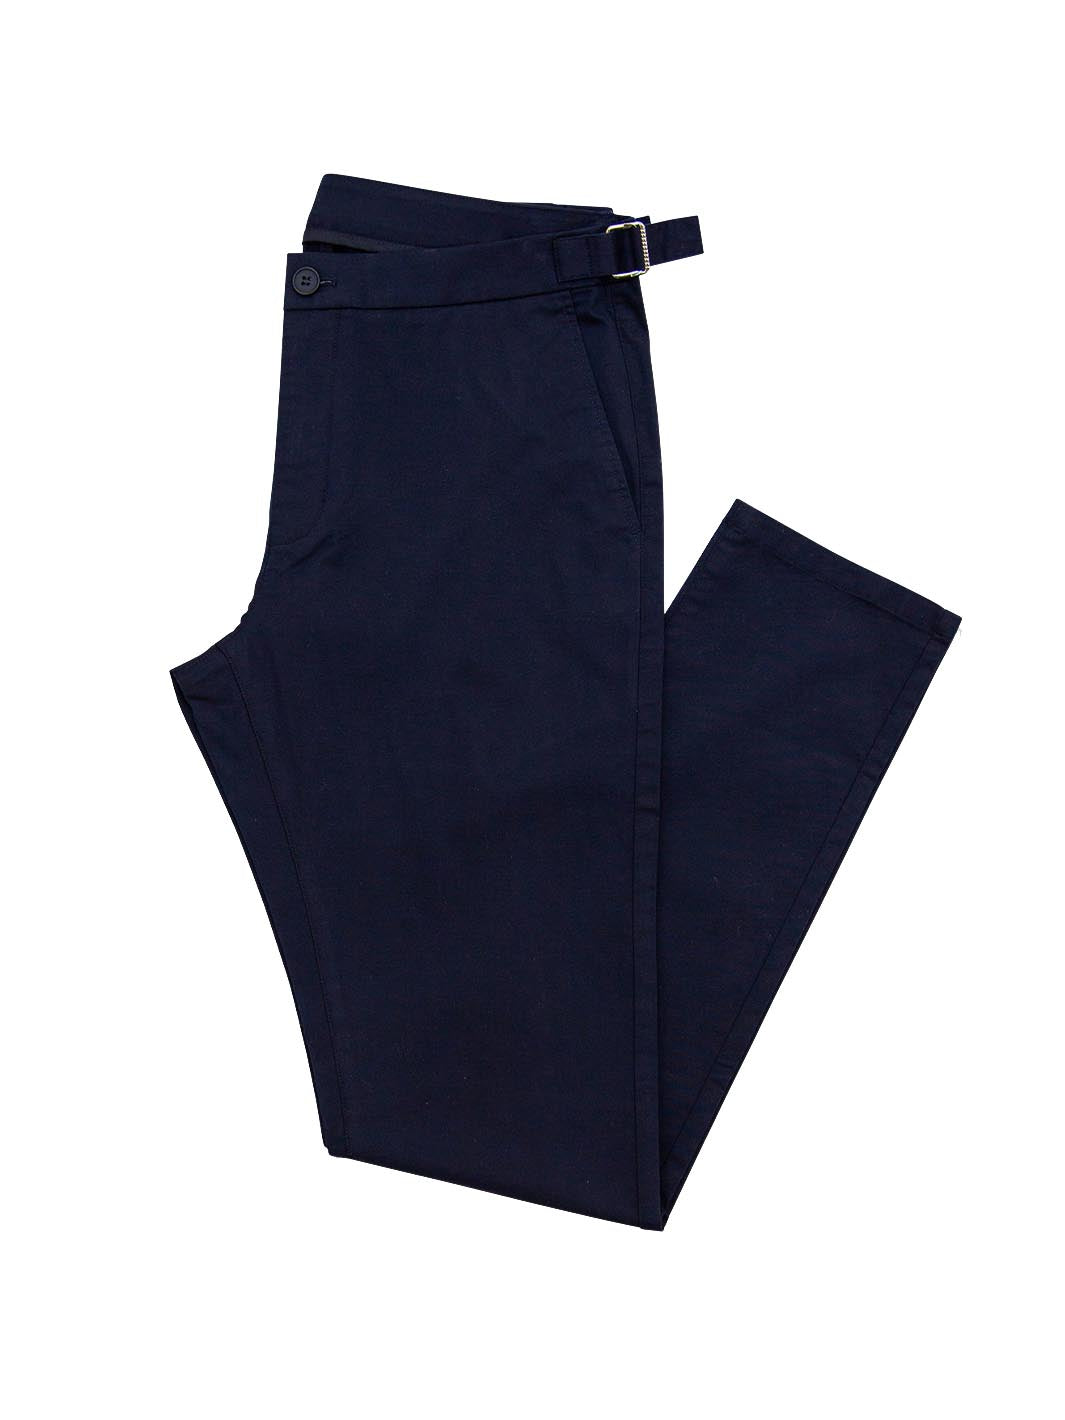 ASUWERE-DAILY-CHINO-NAVY.jpg__PID:cfeae8cf-db84-4417-883e-3ade5d9ccca6